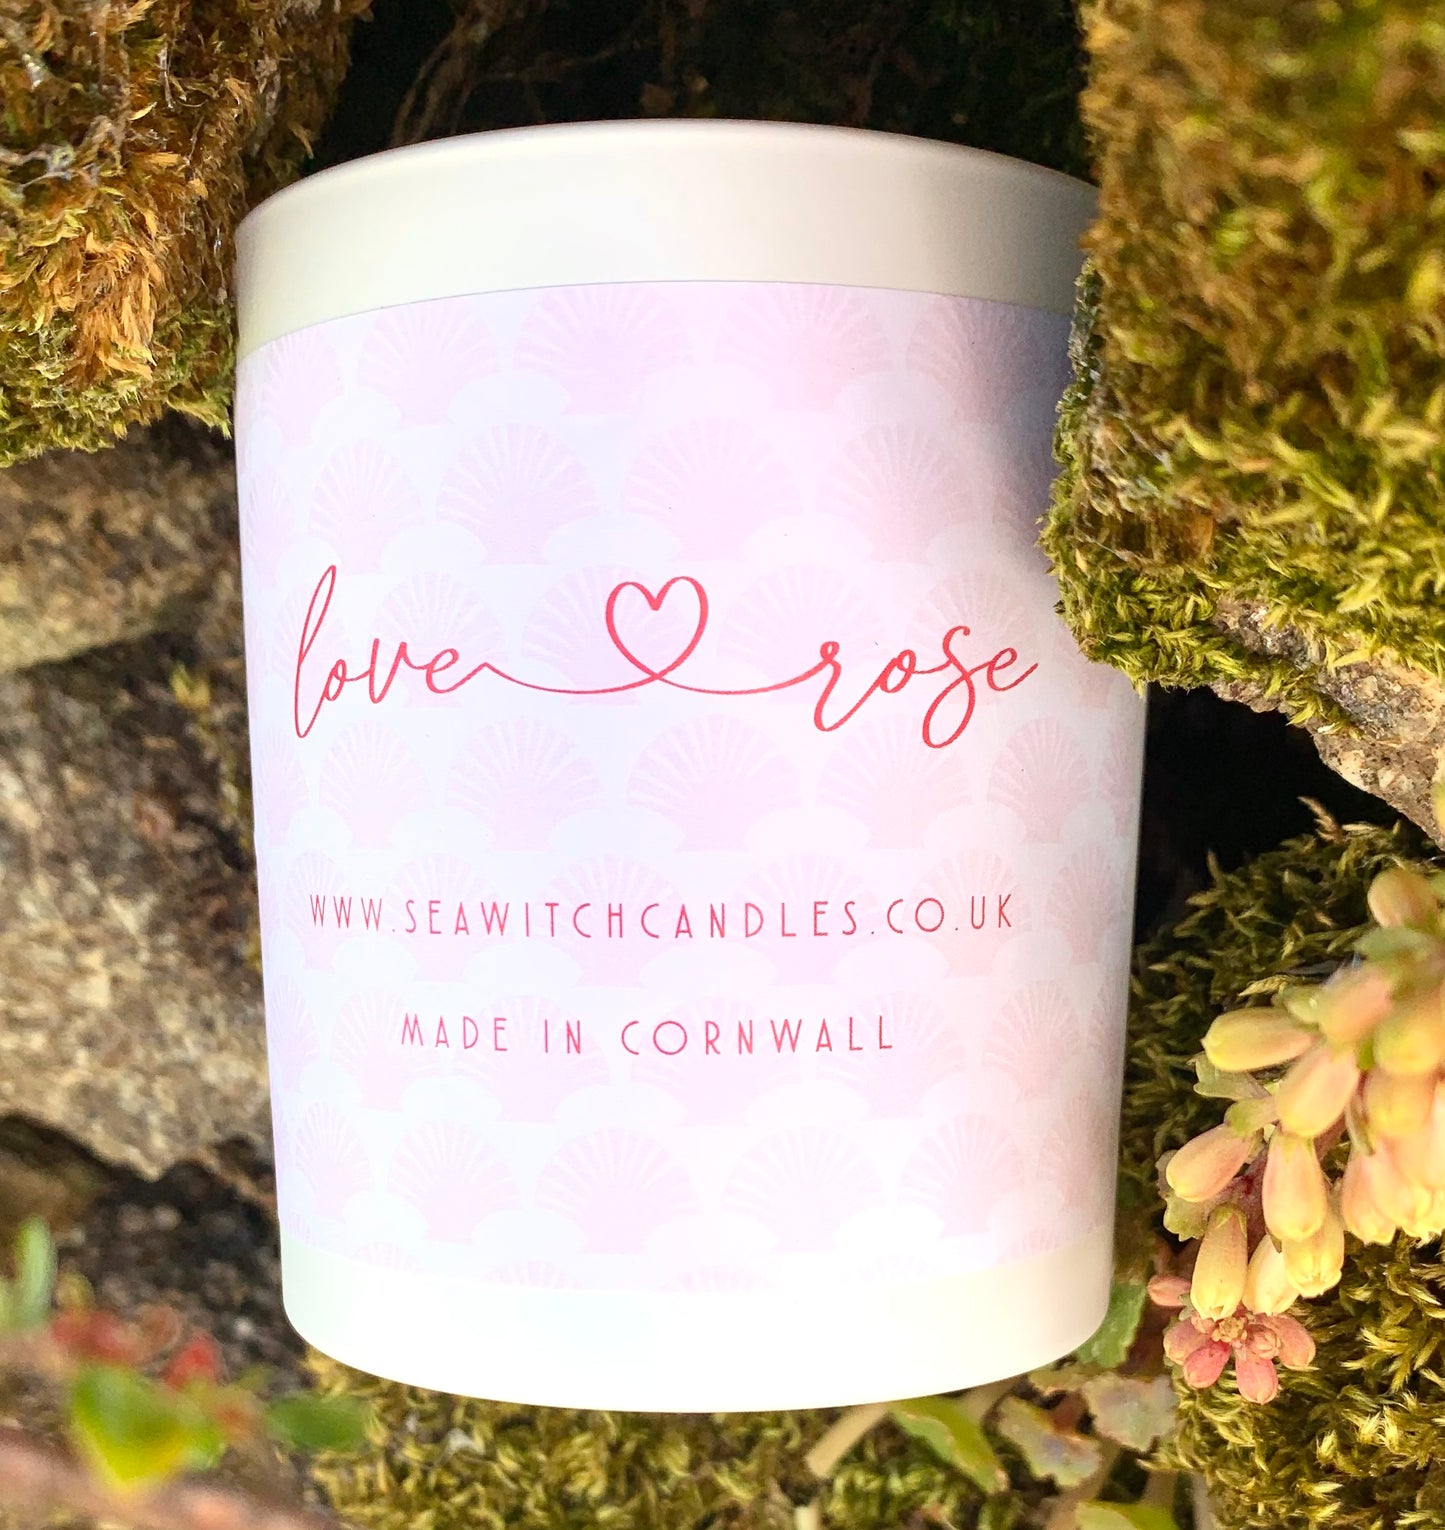 Love Rose Candle  £22  Beautiful Rose Scented Candle  Burn time of at least 50 hours   Ingredients: natural vegan plant wax, fragrance oils, cotton wick   This candle is hand poured into a white china pot and is made in Mousehole, Cornwall by Seawitch Candles Love Candles, Love Rose , Shop small, Shop handmade